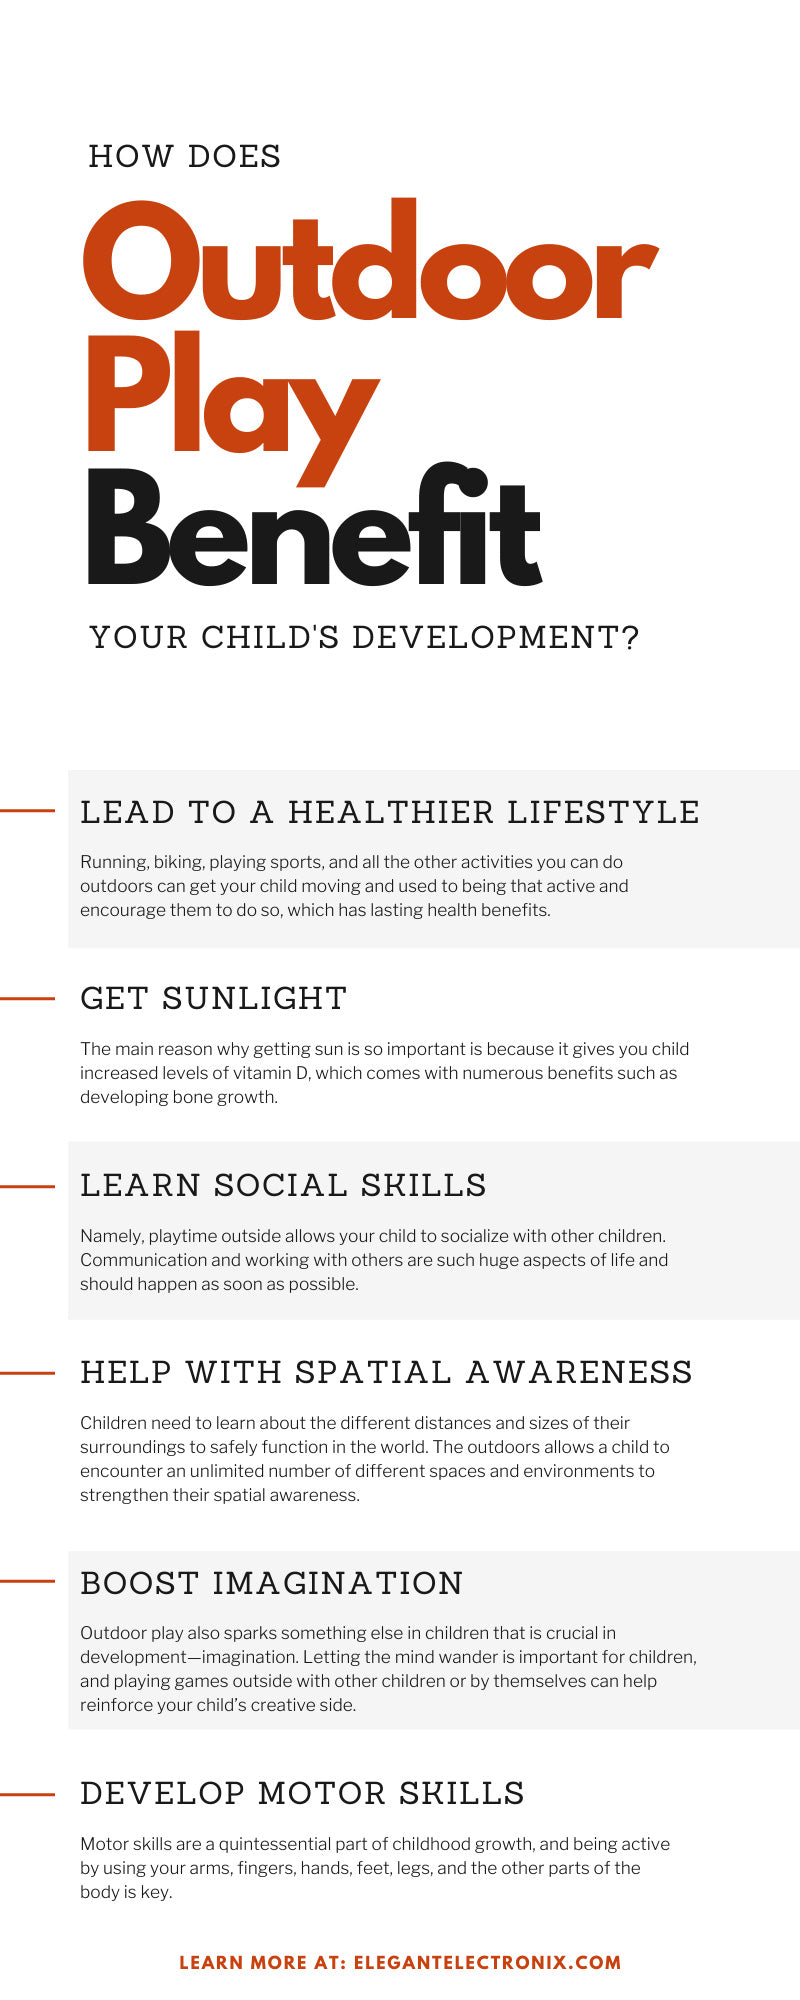 How Does Outdoor Play Benefit Your Child's Development?